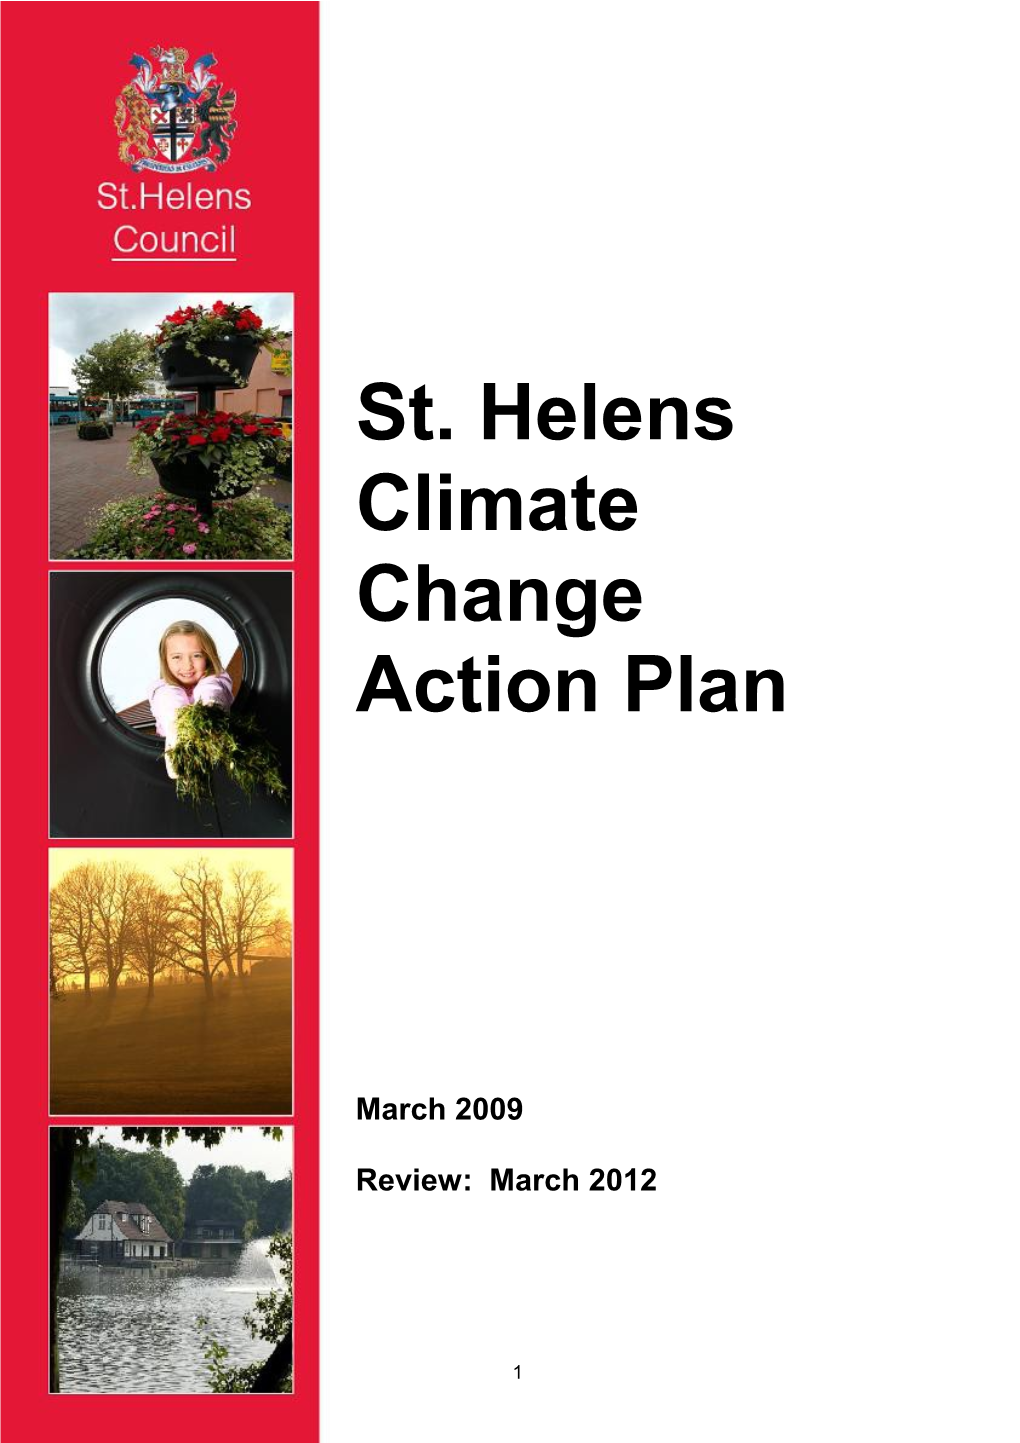 St. Helens Climate Change Action Plan